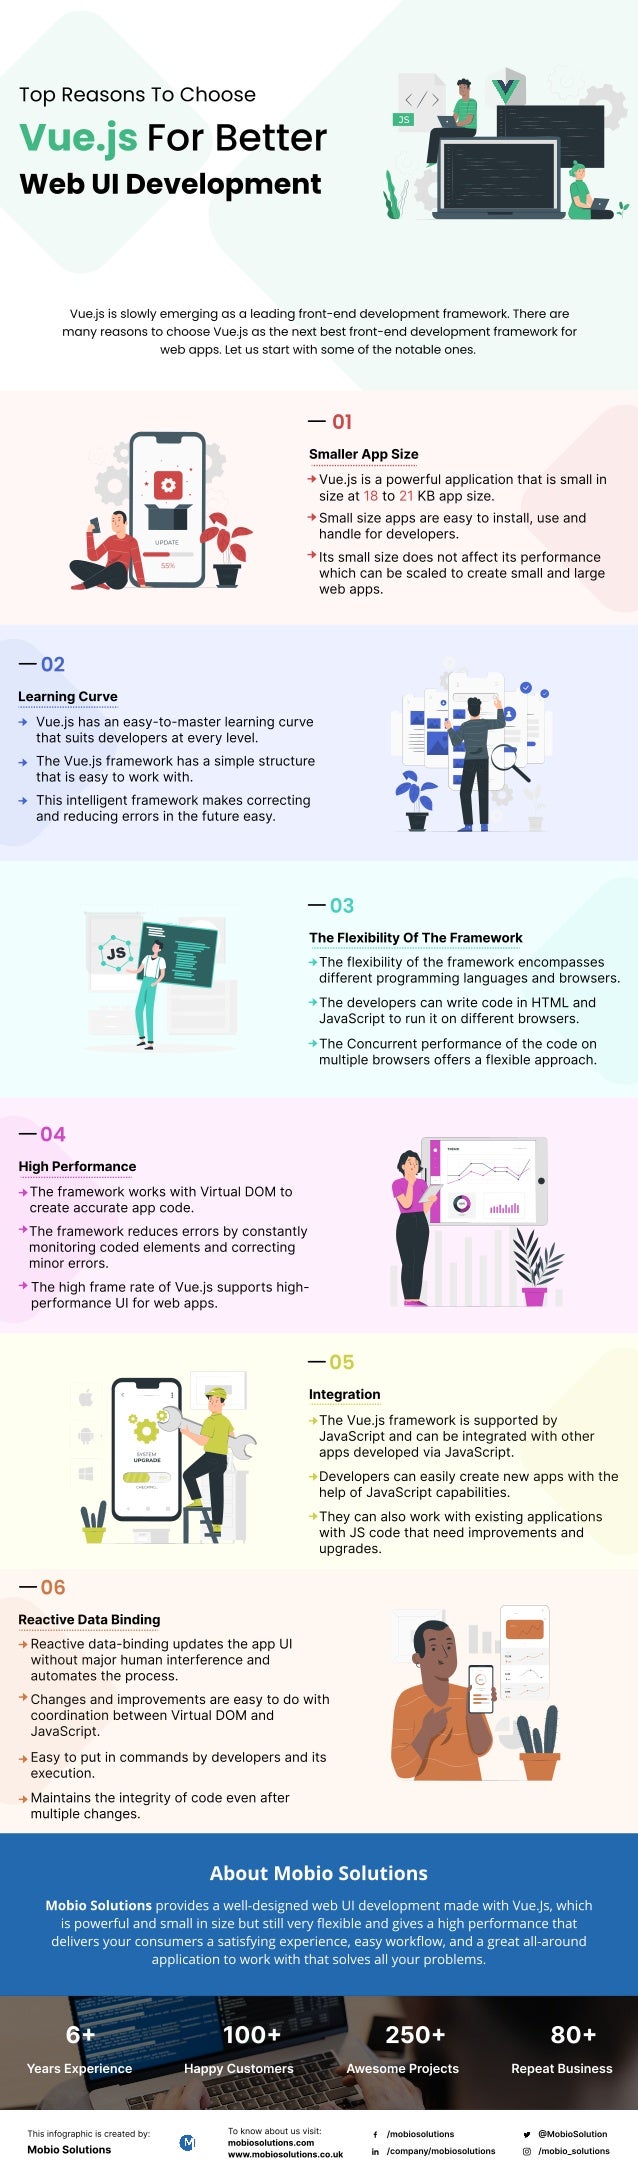 Vue.js is slowly emerging as a leading front-end development framework. There are
many reasons to choose Vue.js as the next best front-end development framework for
web apps. Let us start with some of the notable ones.

This infographic is created by:
Mobio Solutions
To know about us visit:
mobiosolutions.com
www.mobiosolutions.co.uk
/mobiosolutions
/company/mobiosolutions
@MobioSolution
/mobio_solutions
6+
Years Experience
100+
Happy Customers
250+
Awesome Projects
80+
Repeat Business
Mobio Solutions provides a well-designed web UI development made with Vue.Js, which
is powerful and small in size but still very flexible and gives a high performance that
delivers your consumers a satisfying experience, easy workflow, and a great all-around
application to work with that solves all your problems.
About Mobio Solutions
12.2K
19%
6.2K
6%
8.6K
9%
04
The framework works with Virtual DOM to
create accurate app code.

High Performance
The framework reduces errors by constantly
monitoring coded elements and correcting
minor errors.
The high frame rate of Vue.js supports high-
performance UI for web apps.
05
Integration

The Vue.js framework is supported by
JavaScript and can be integrated with other
apps developed via JavaScript.

Developers can easily create new apps with the
help of JavaScript capabilities.

They can also work with existing applications
with JS code that need improvements and
upgrades.
06
Reactive Data Binding

Reactive data-binding updates the app UI
without major human interference and
automates the process.

Changes and improvements are easy to do with
coordination between Virtual DOM and
JavaScript.

Easy to put in commands by developers and its
execution.
Maintains the integrity of code even after
multiple changes.

Smaller AppSize
Vue.js is a powerful application that is small in
size at to KB app size.

18 21
Small size apps are easy to install, use and
handle for developers.

Its small size does not affect its performance
which can be scaled to create small and large
web apps.

01
Learning Curve
Vue.js has an easy-to-master learning curve
that suits developers at every level.

The Vue.js framework has a simple structure
that is easy to work with.
This intelligent framework makes correcting
and reducing errors in the future easy.

02
The FlexibilityOf The Framework

The flexibility of the framework encompasses
different programming languages and browsers.
The developers can write code in HTML and
JavaScript to run it on different browsers.

The Concurrent performance of the code on
multiple browsers offers a flexible approach.

03
Top Reasons To Choose
Vue.js For Better 

Web UI Development
 